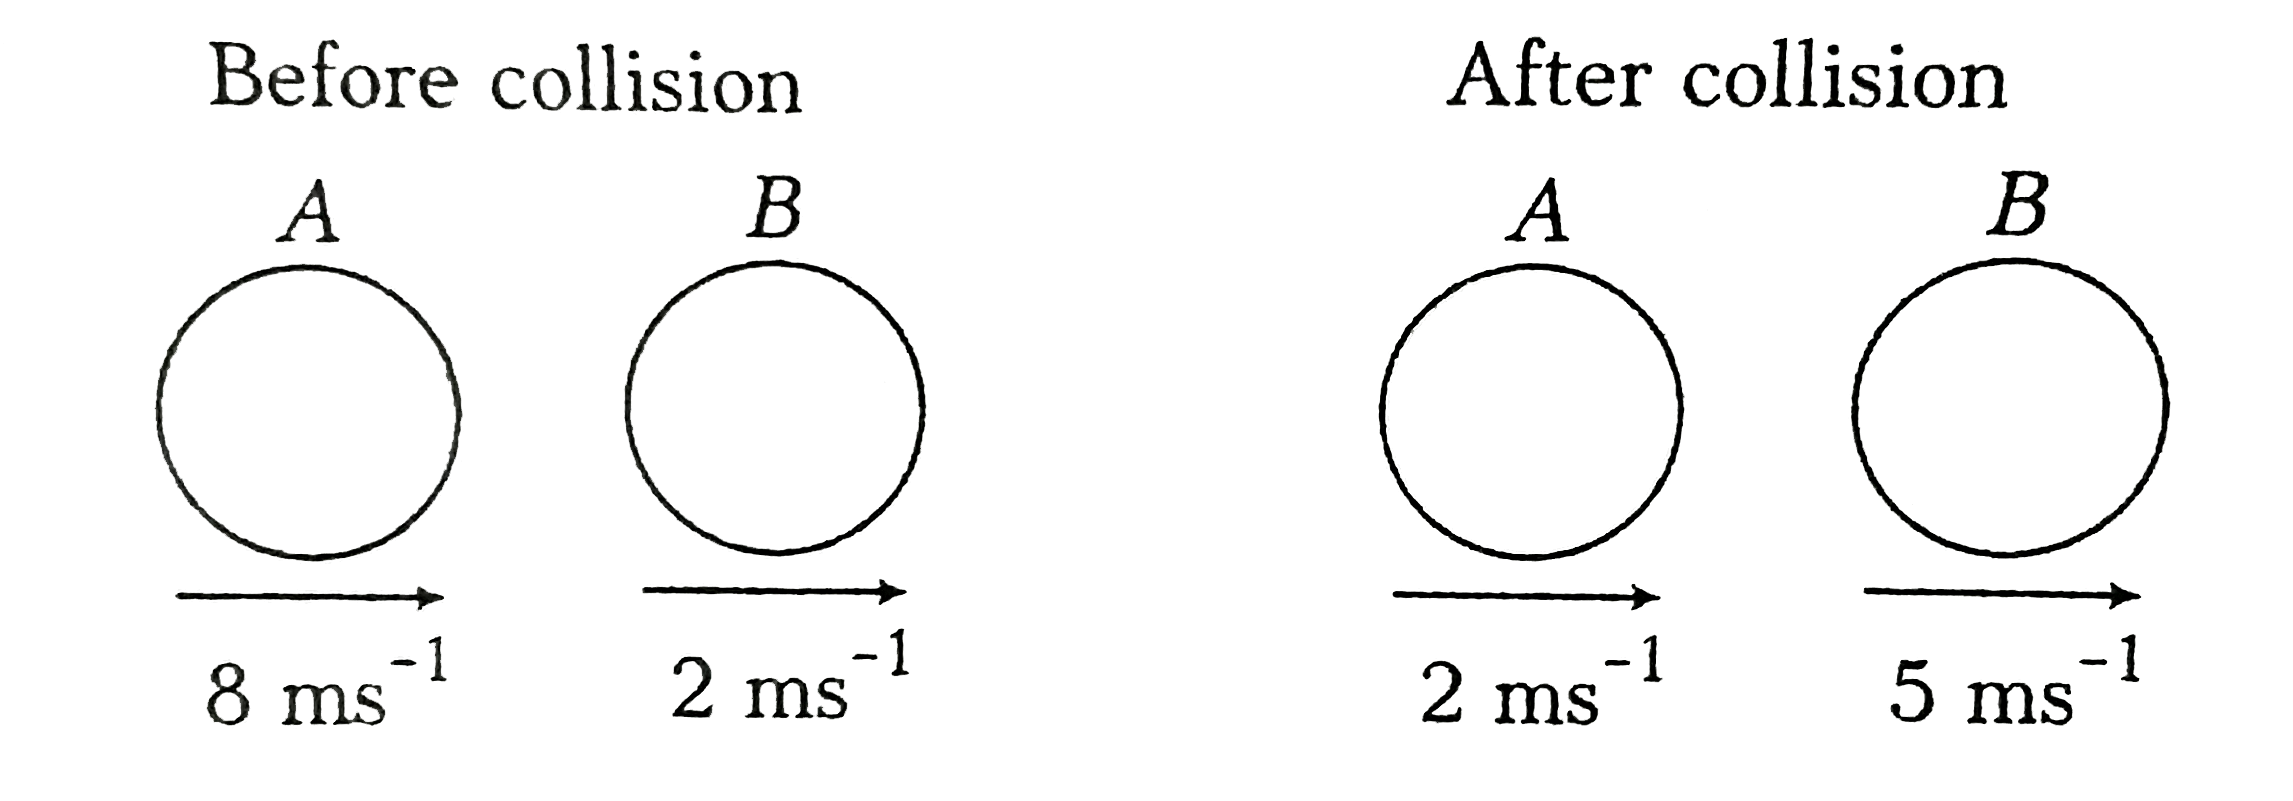 The two diagrams show the situations before and after a collision between two spheres A and B of equal radii moving along the same straight line on a smooth horizontal surface. The coefficient of restitution e is